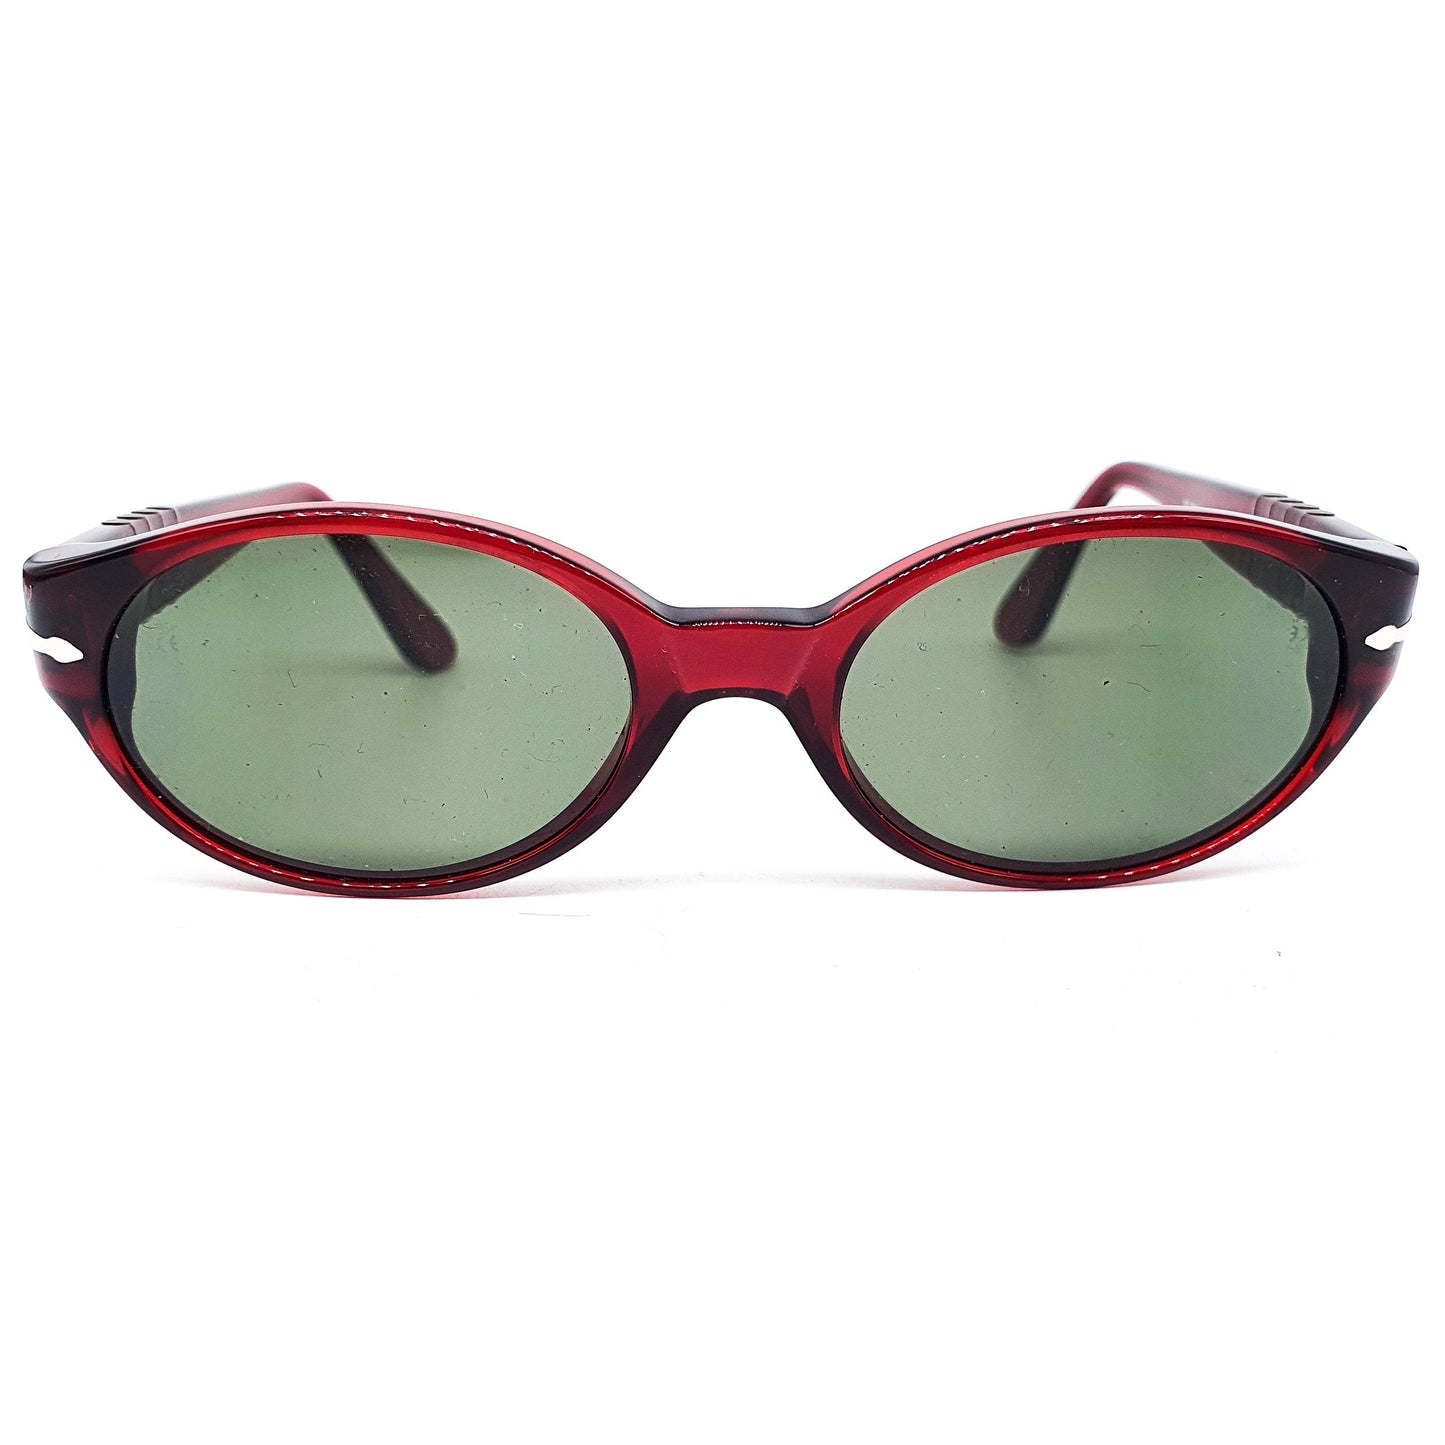 Persol 2520 tortoise red sunglasses hand made in Italy, 1980s NOS